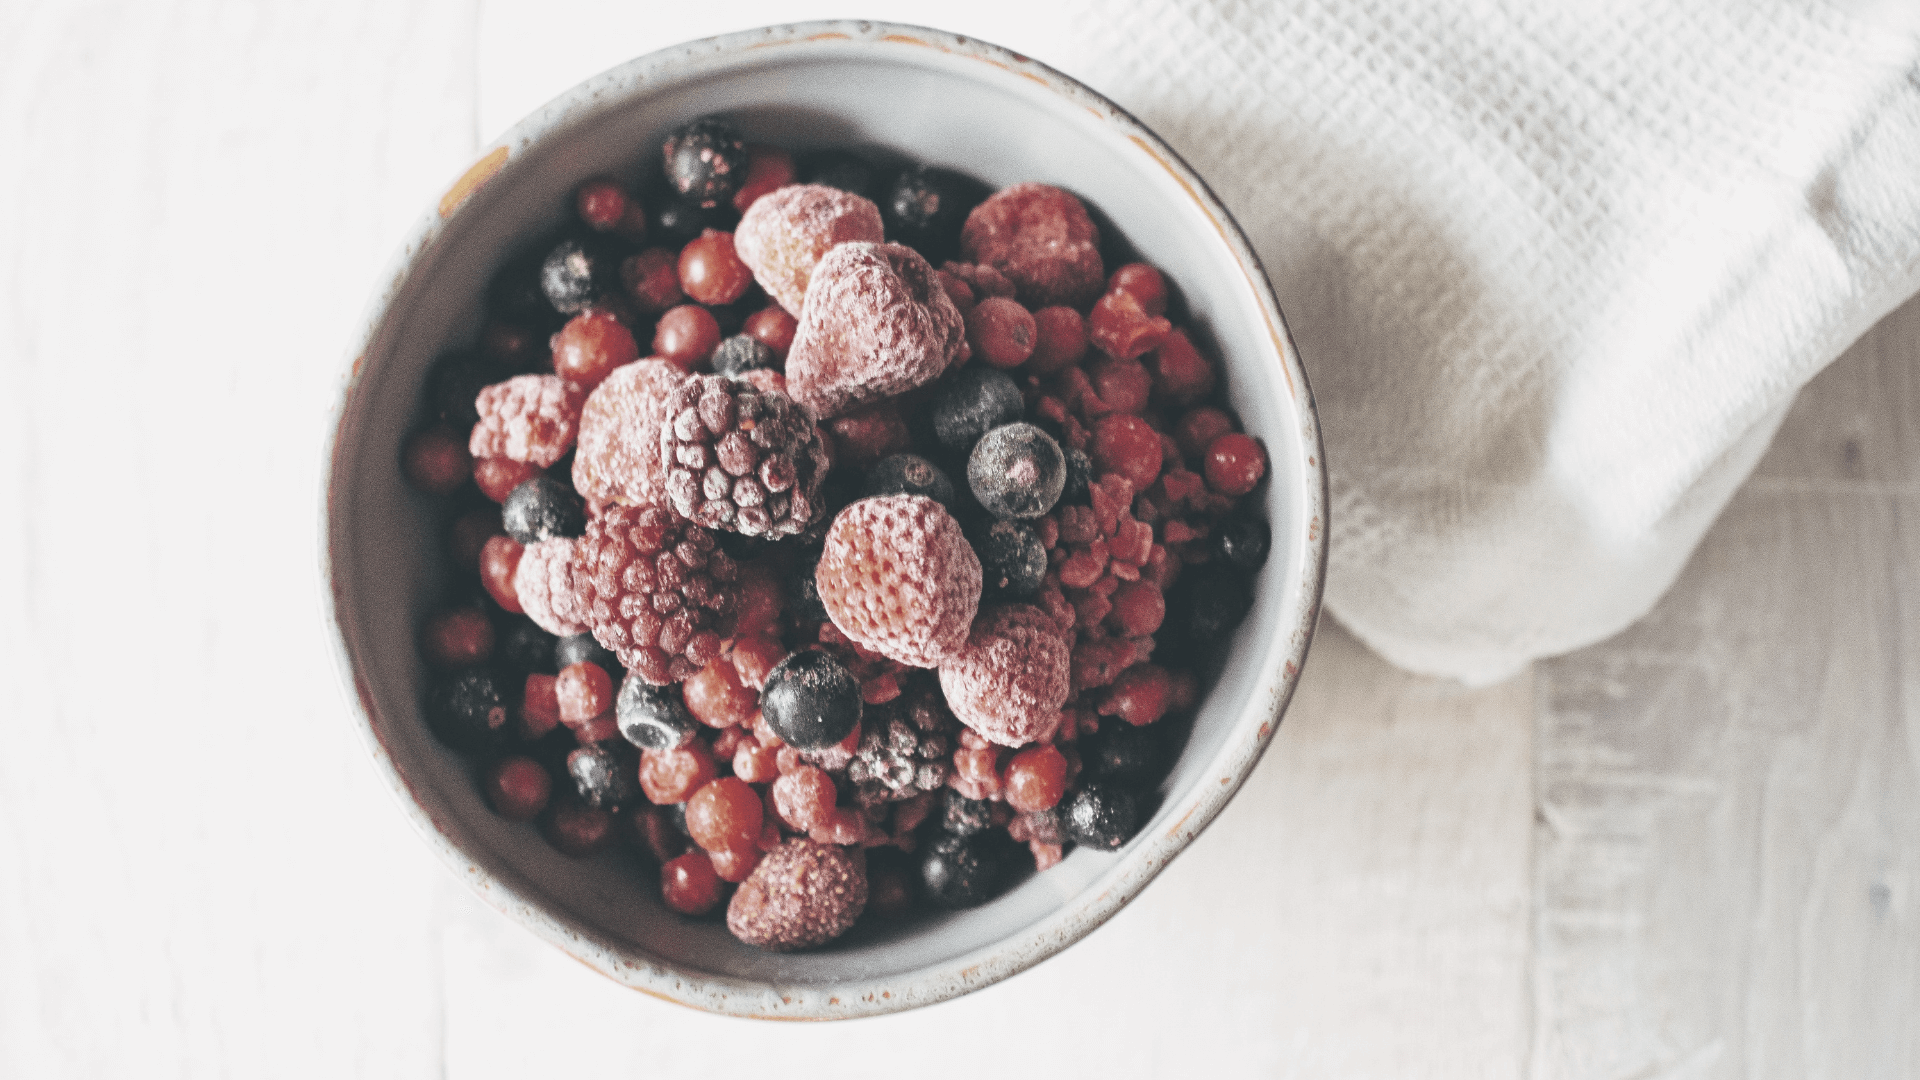 14 Things to Know Before Changing Your Diet to Heal Your Gut